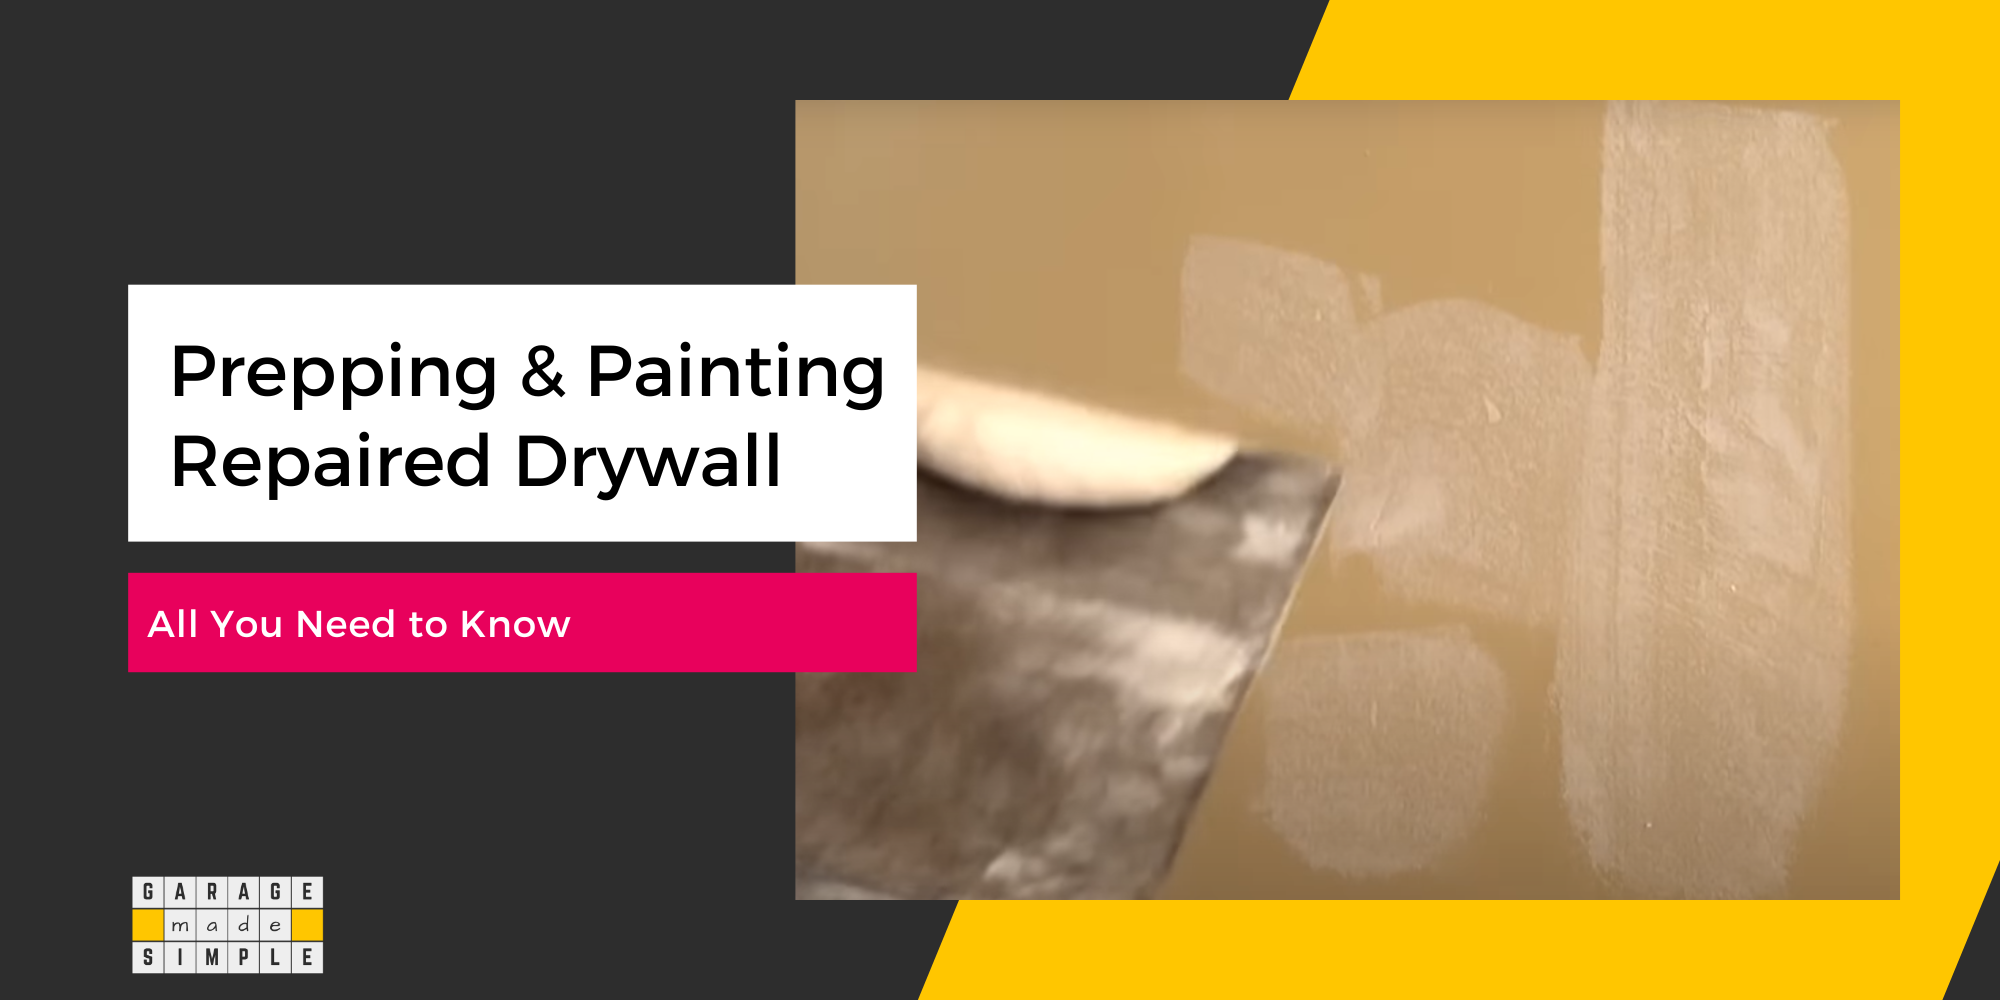 Painting Repaired Drywall: Simple & Easy How-to Guide